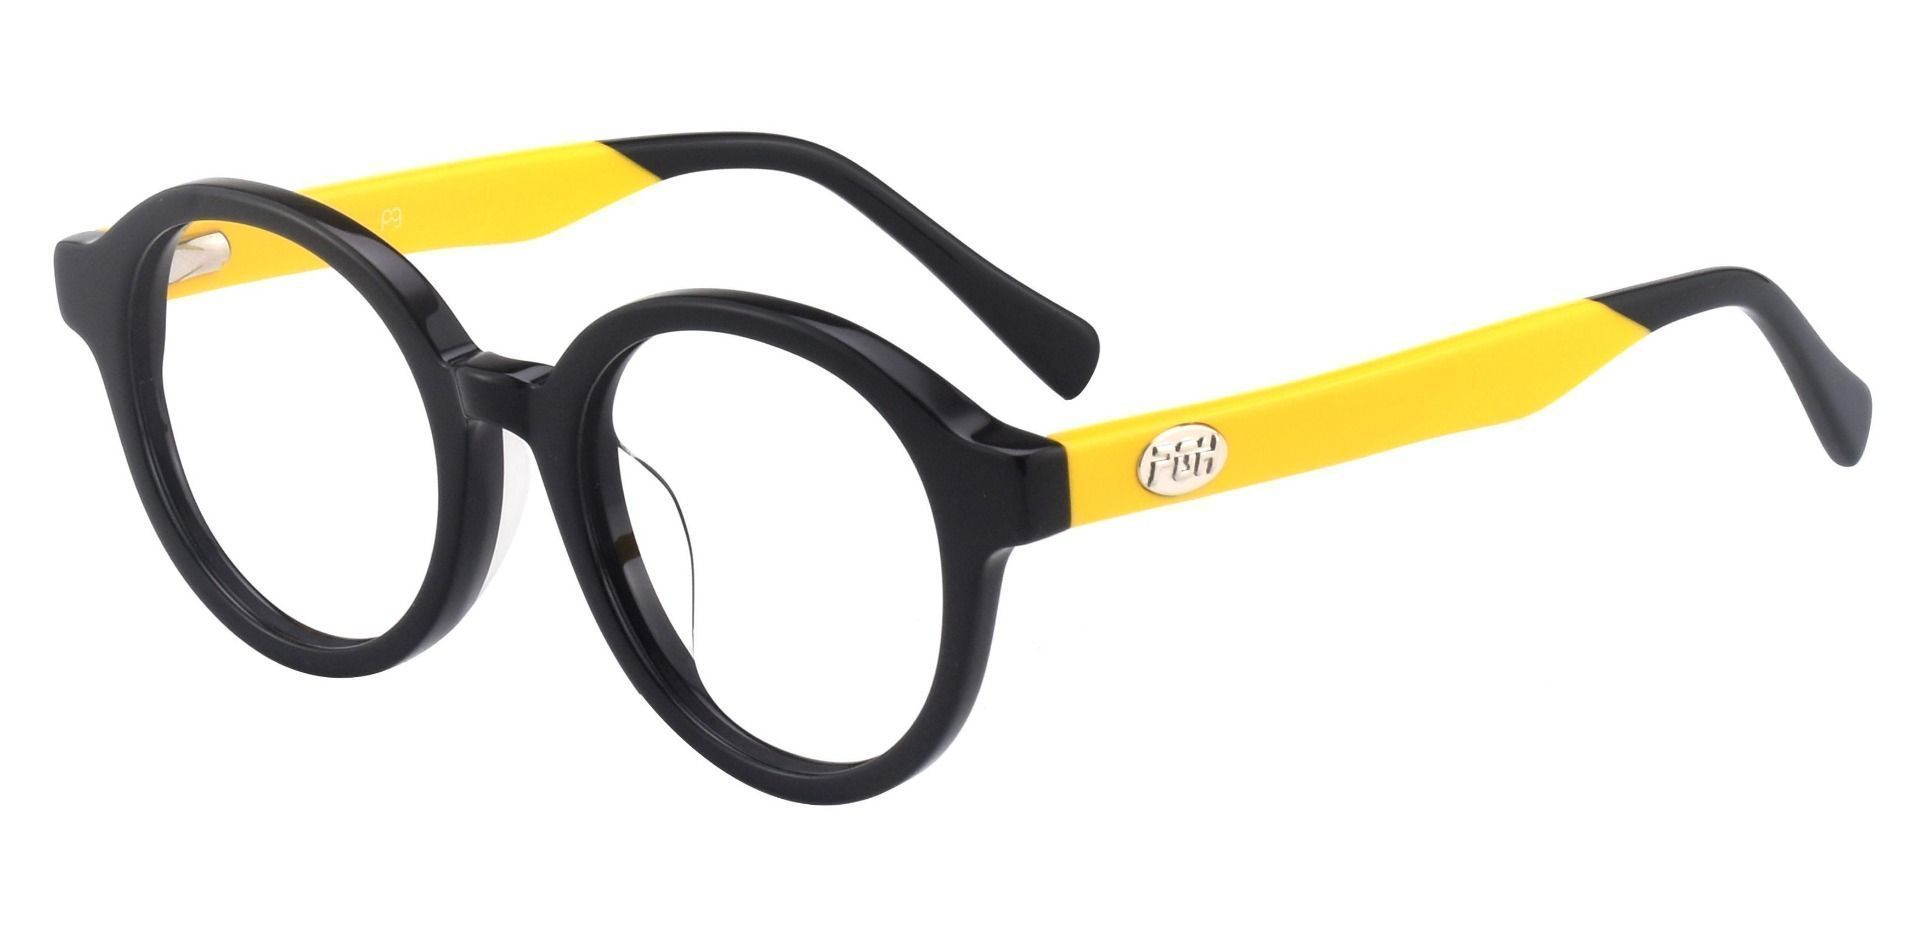 Champ Round Lined Bifocal Glasses - The Frame Is Black And Gold